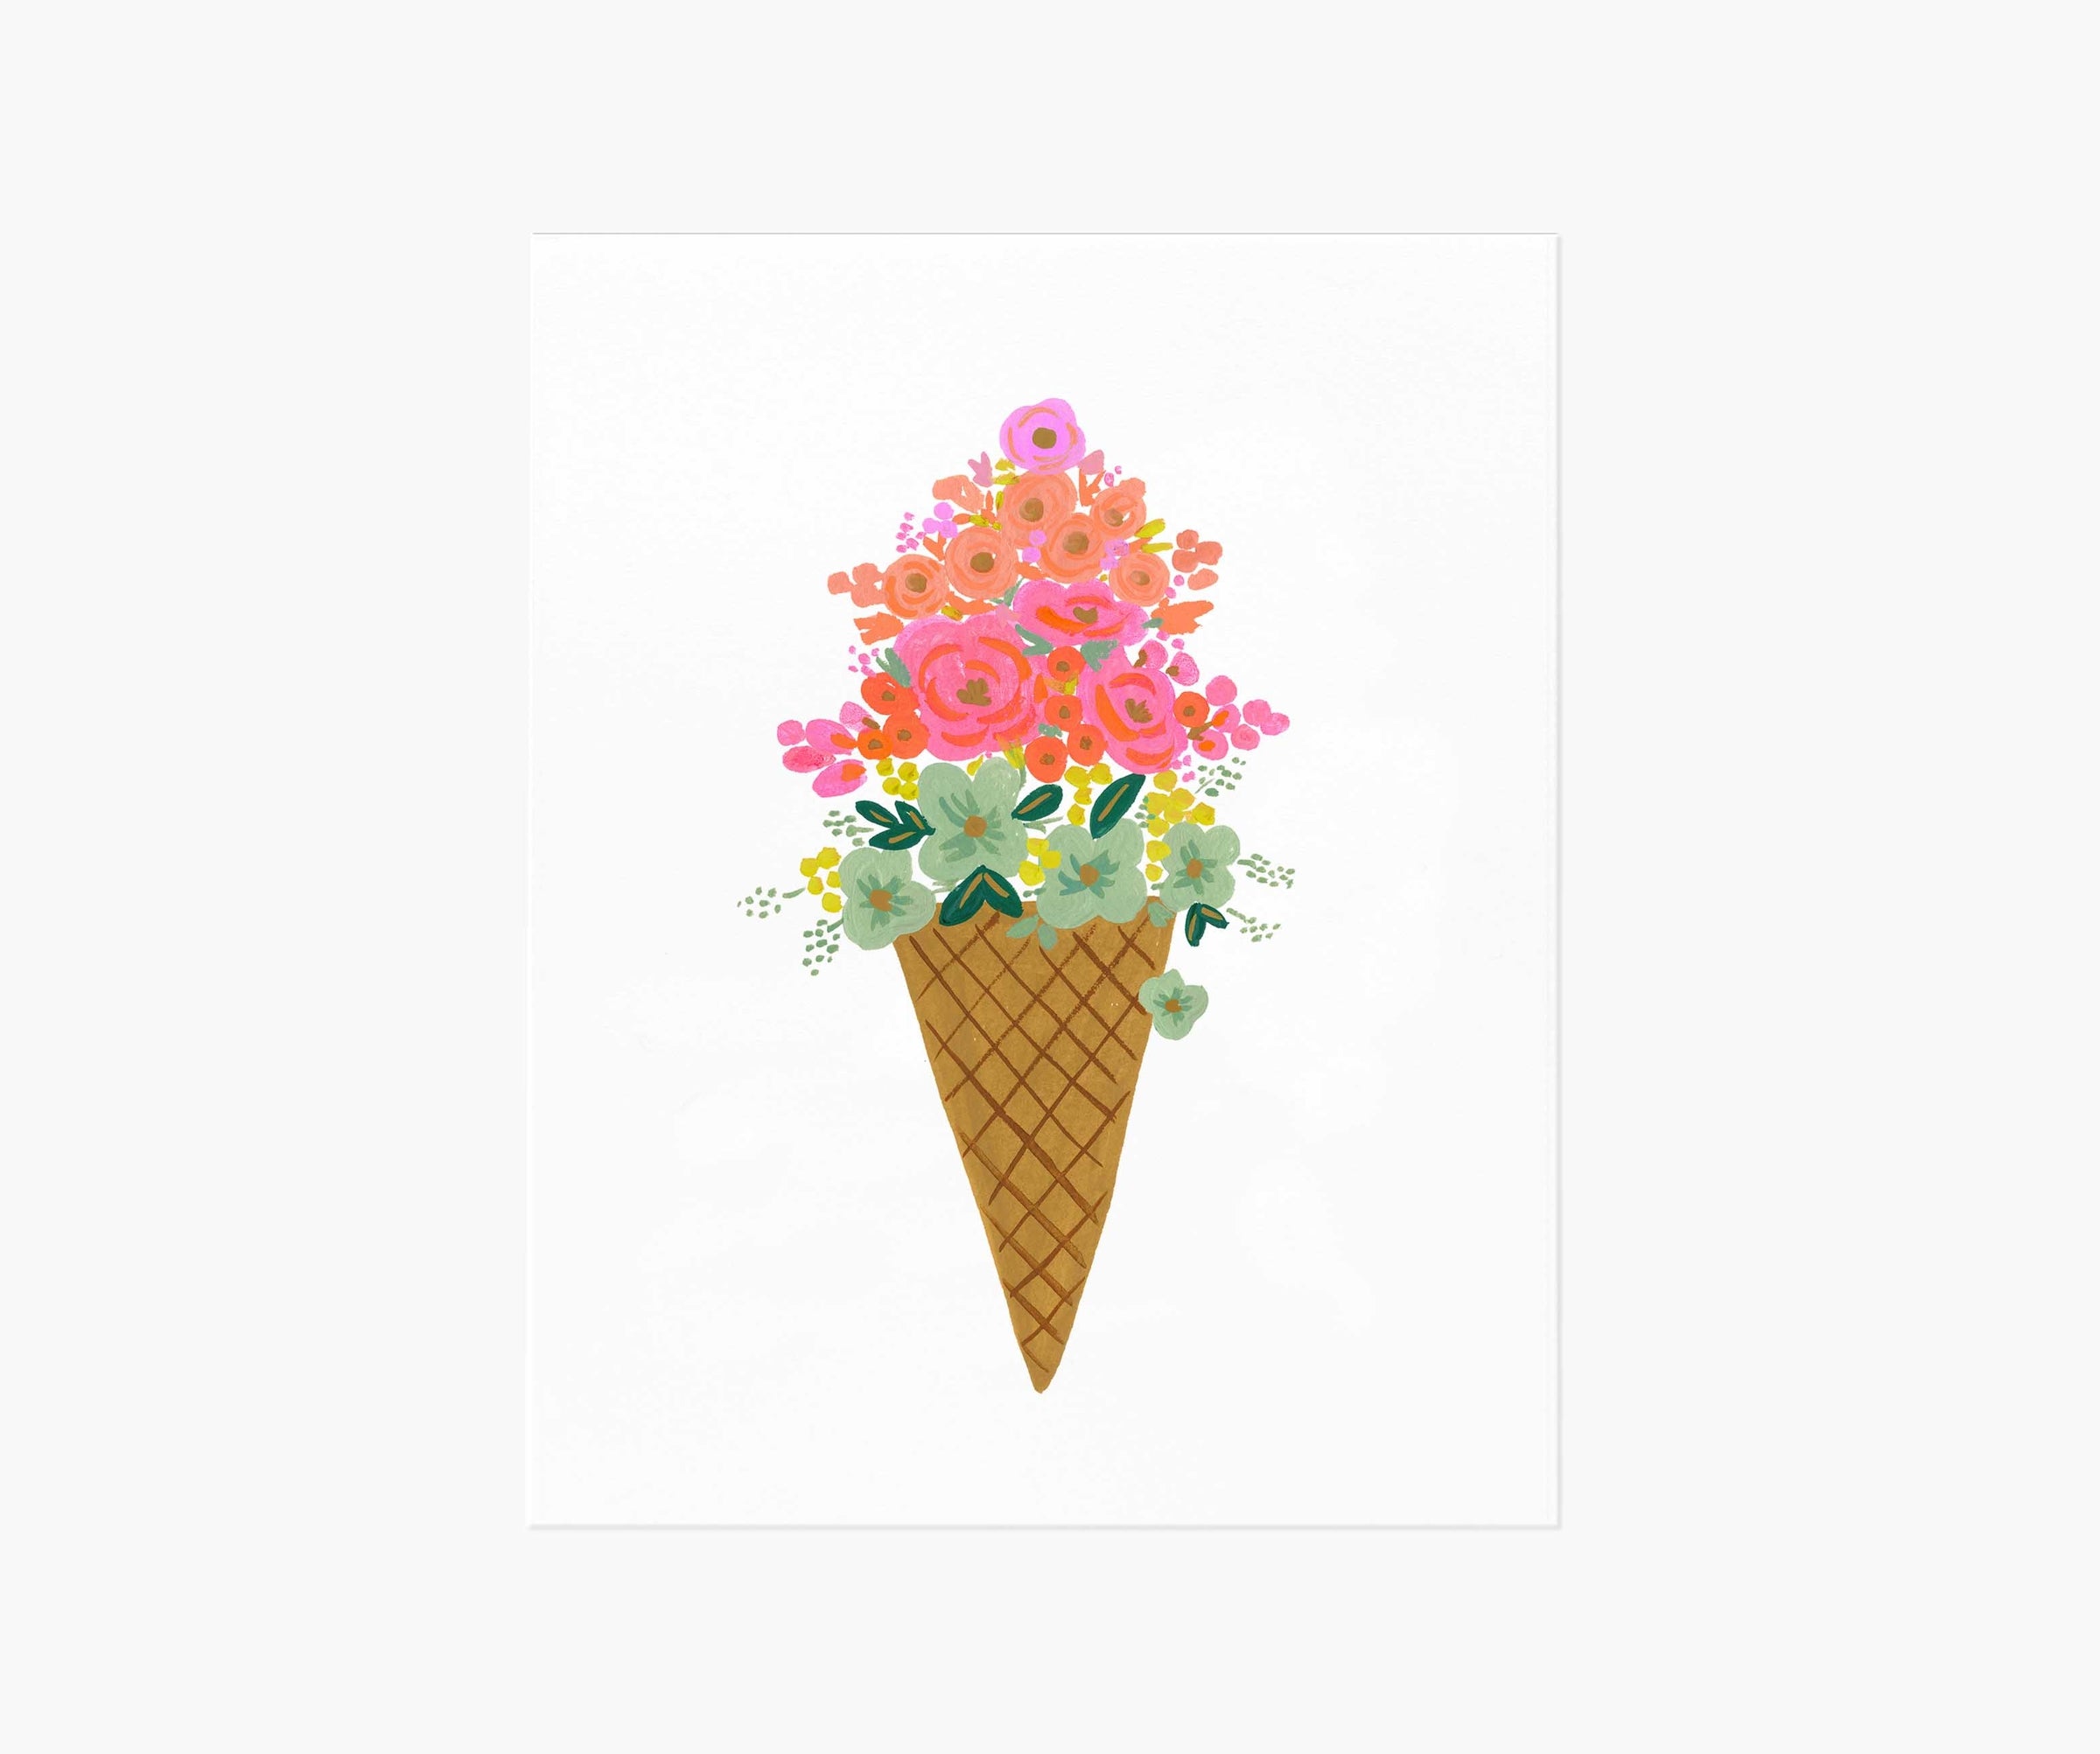 Illustration of a bouquet shaped like an ice cream cone with various flowers